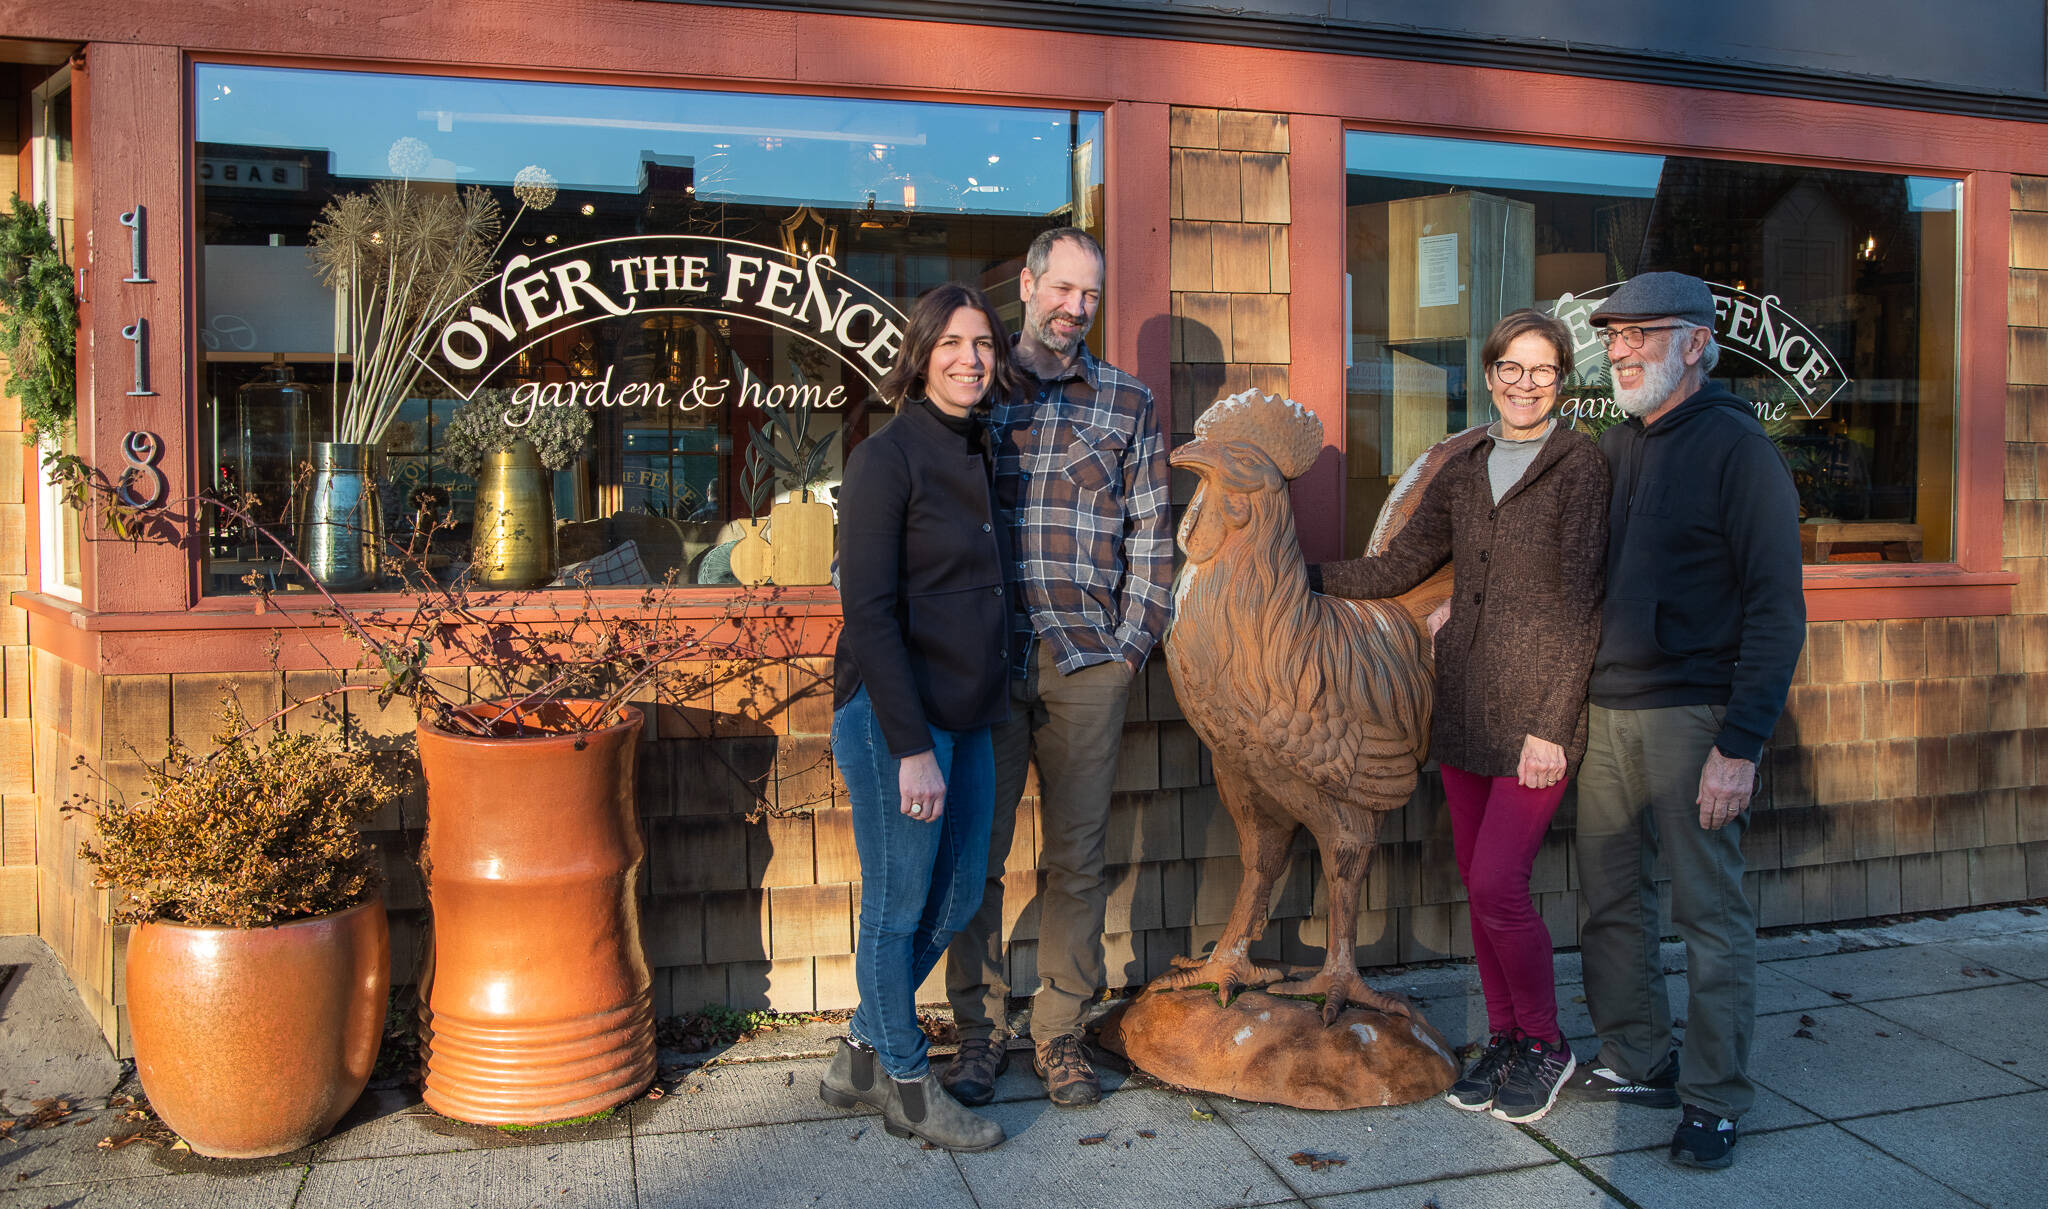 Sequim Gazette photo by Emily Matthiessen / Emily Underwood stands with her husband Scott Underwood, left, and her parents Jeri and Fran Sanford stand on the other side of Over the Fence’s giant metal rooster. The end of 2022 marks the transition of ownership of the store between the two couples.